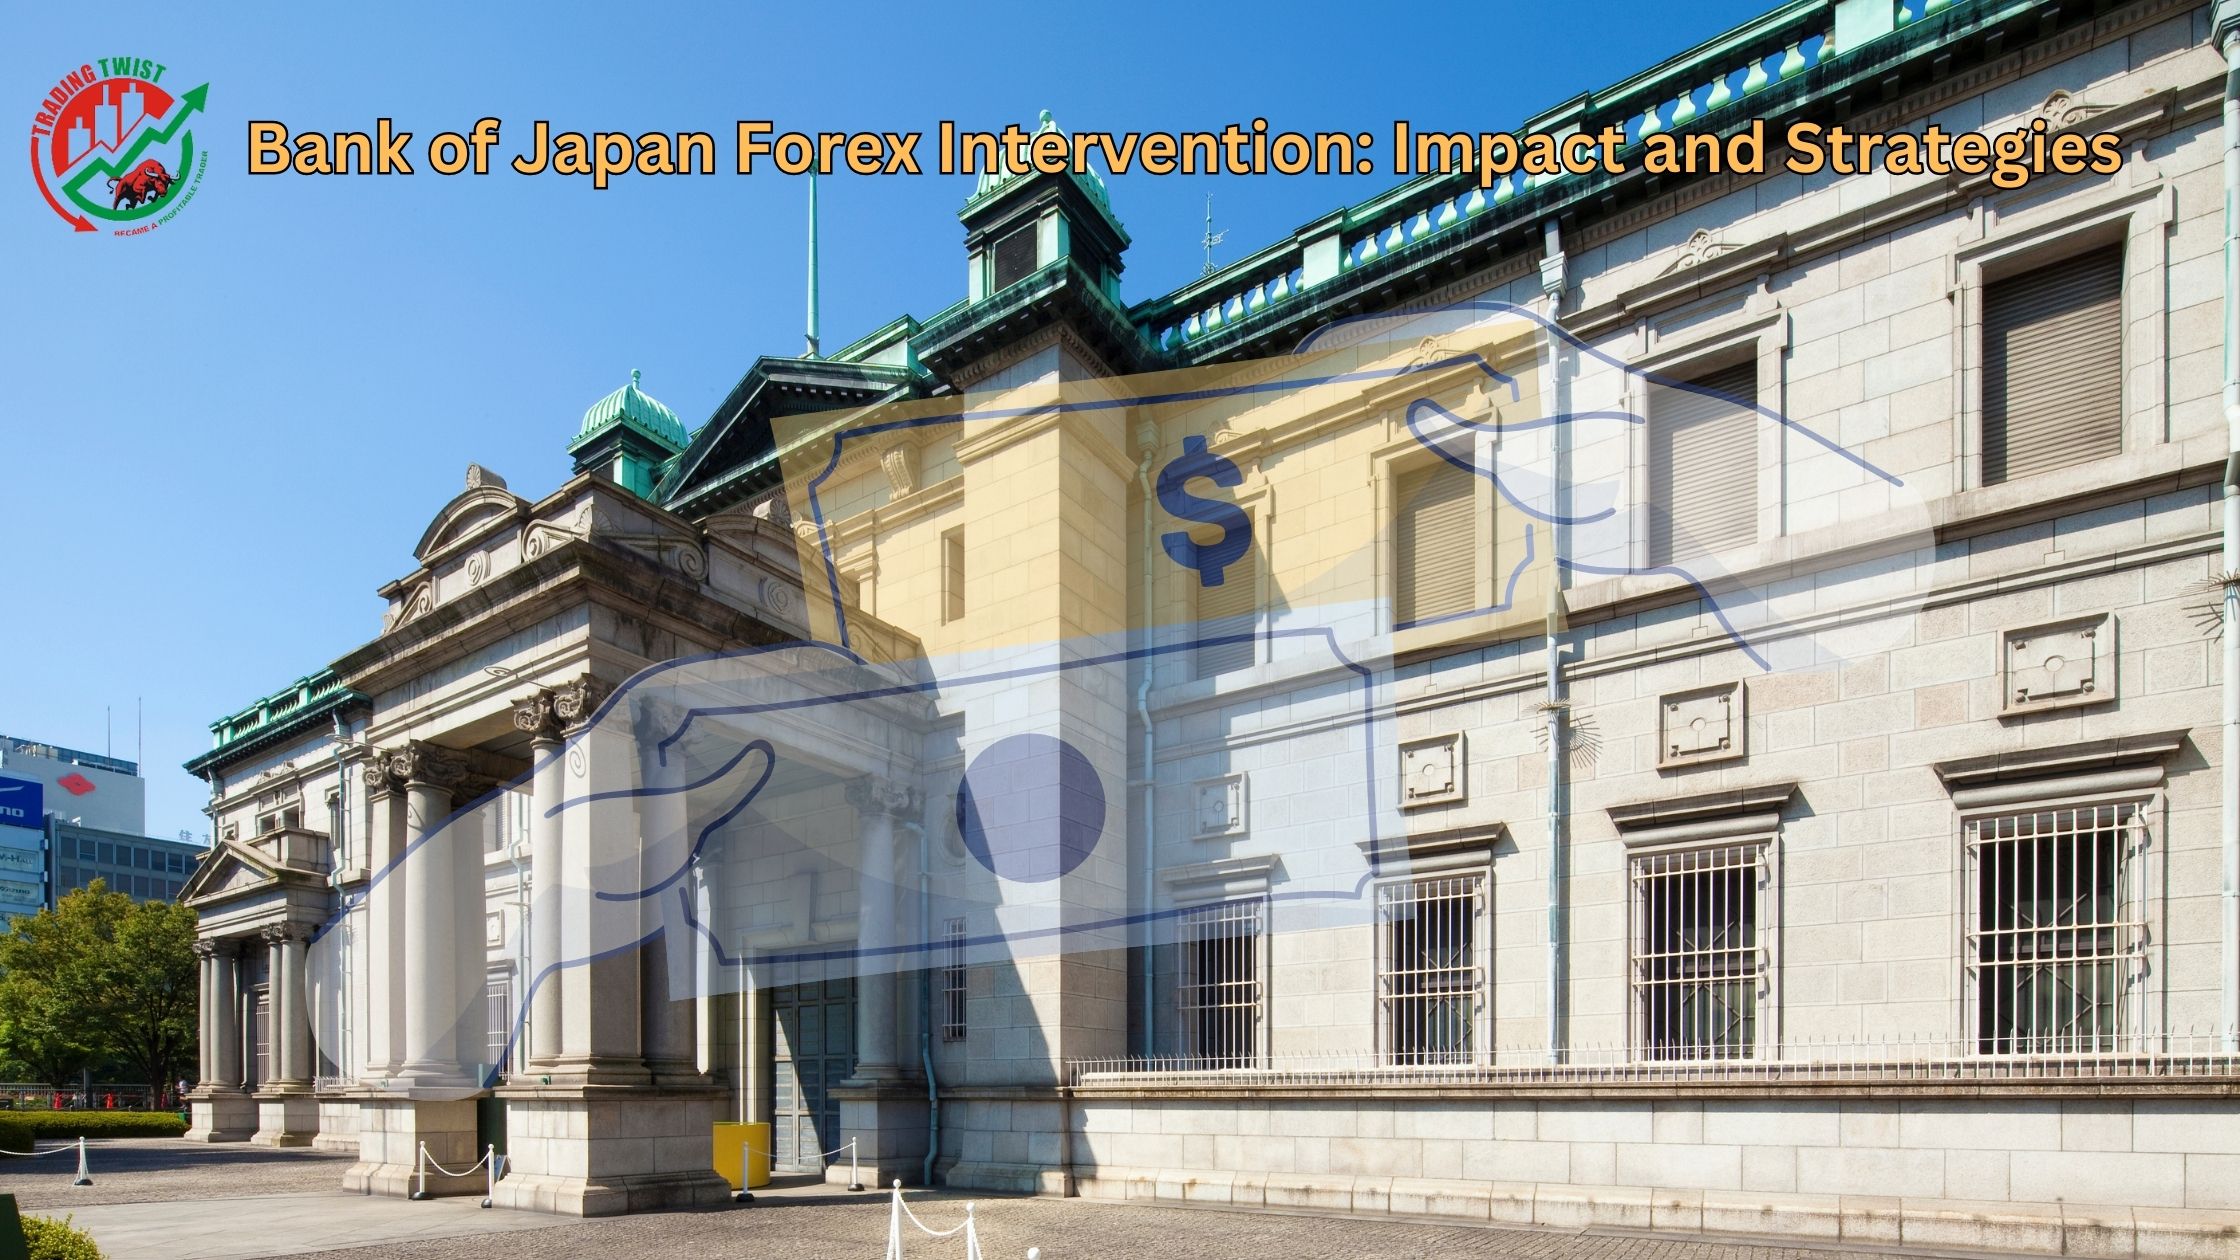 Bank of Japan Forex Intervention: Impact and Strategies